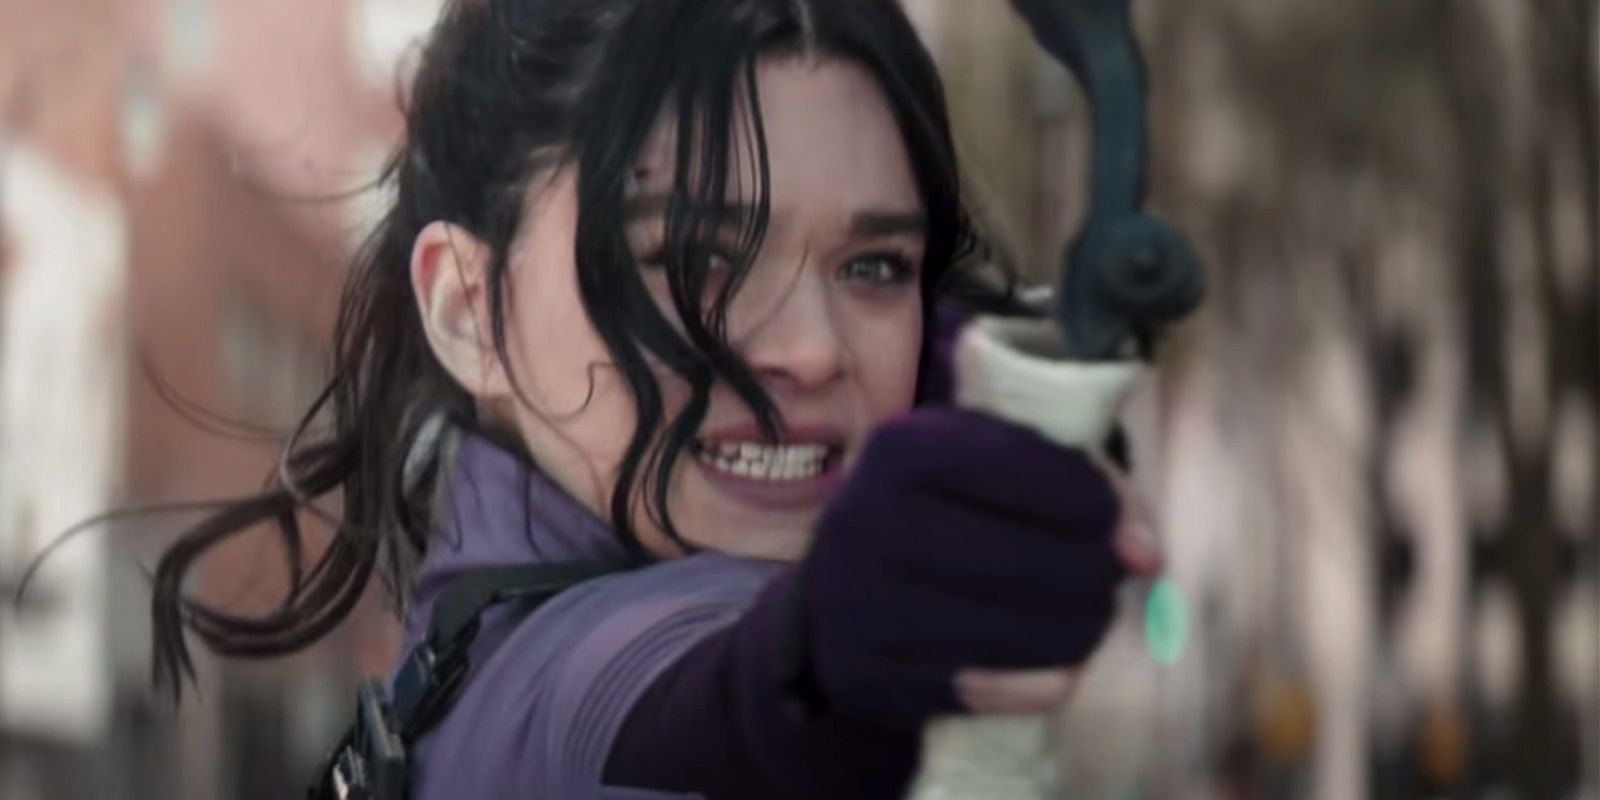 Kate Bishop using a bow and arrow in Hawkeye